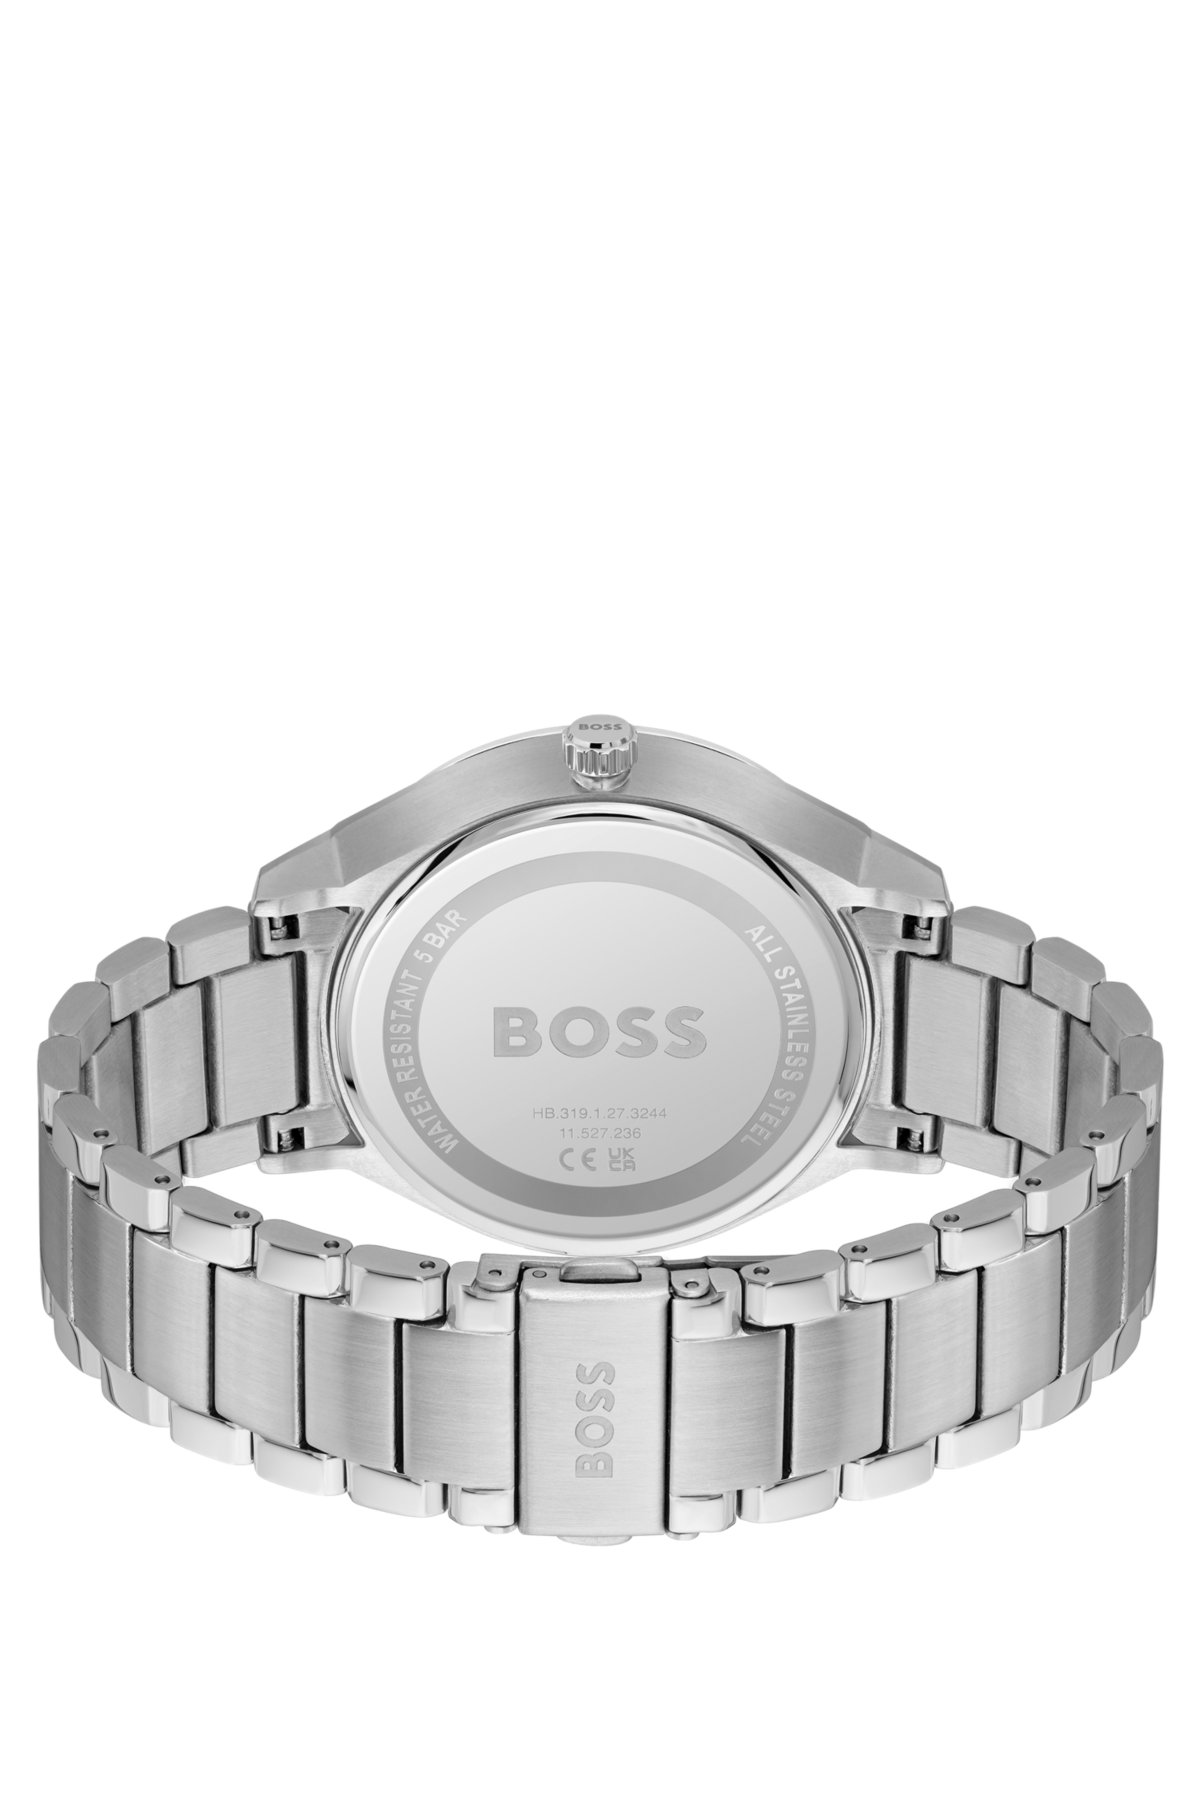 BOSS - bracelet watch stainless-steel link Blue-dial with